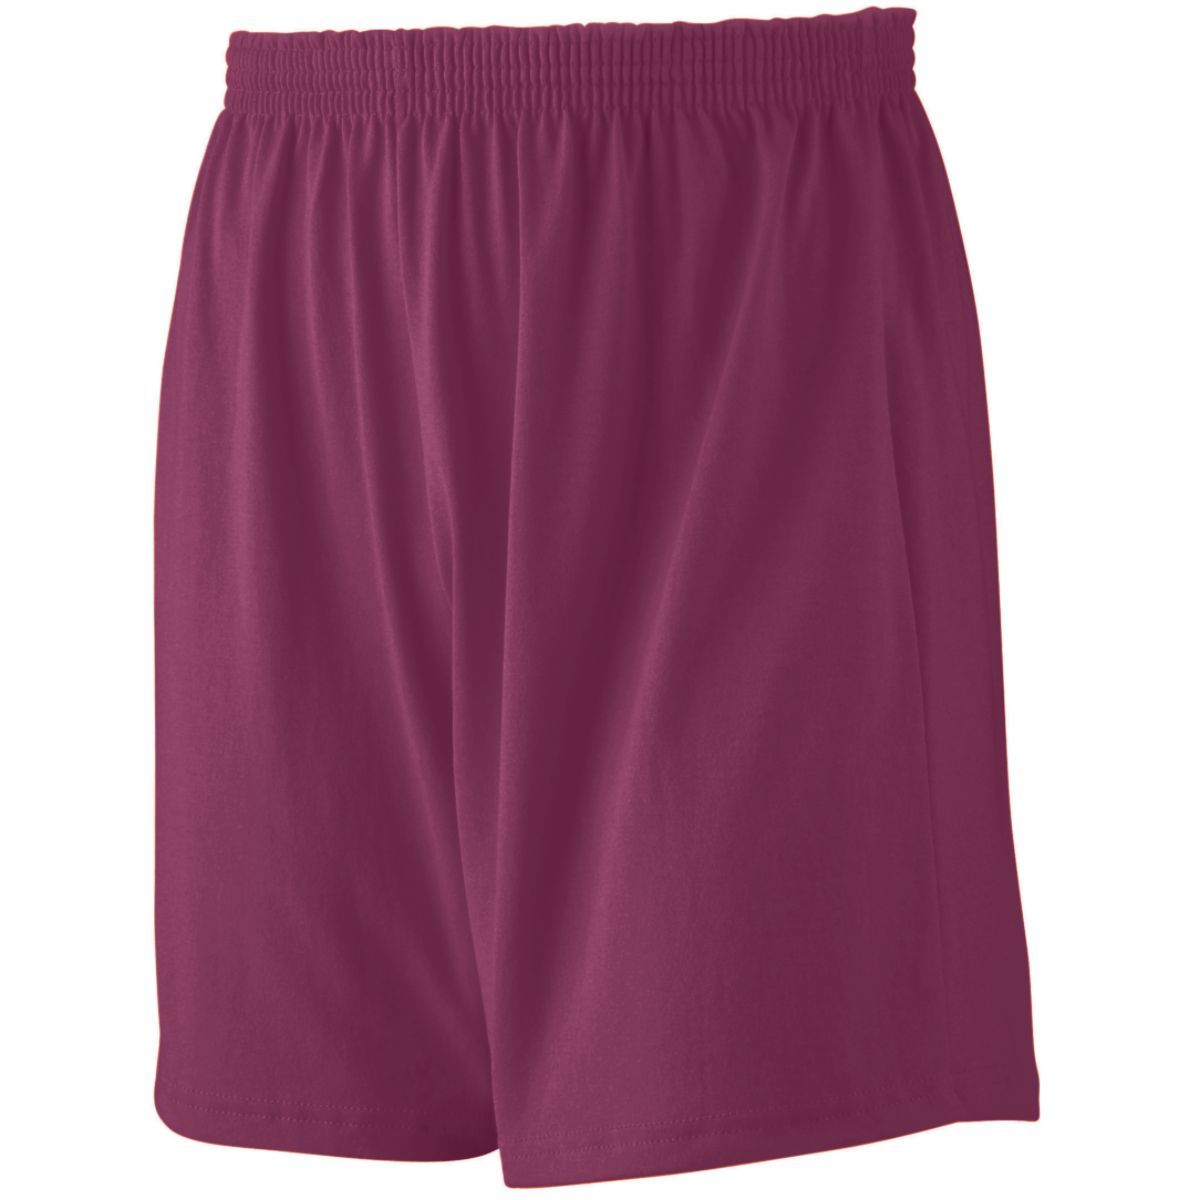 Augusta Sportswear Jersey Knit Shorts in Maroon  -Part of the Adult, Adult-Shorts, Augusta-Products product lines at KanaleyCreations.com